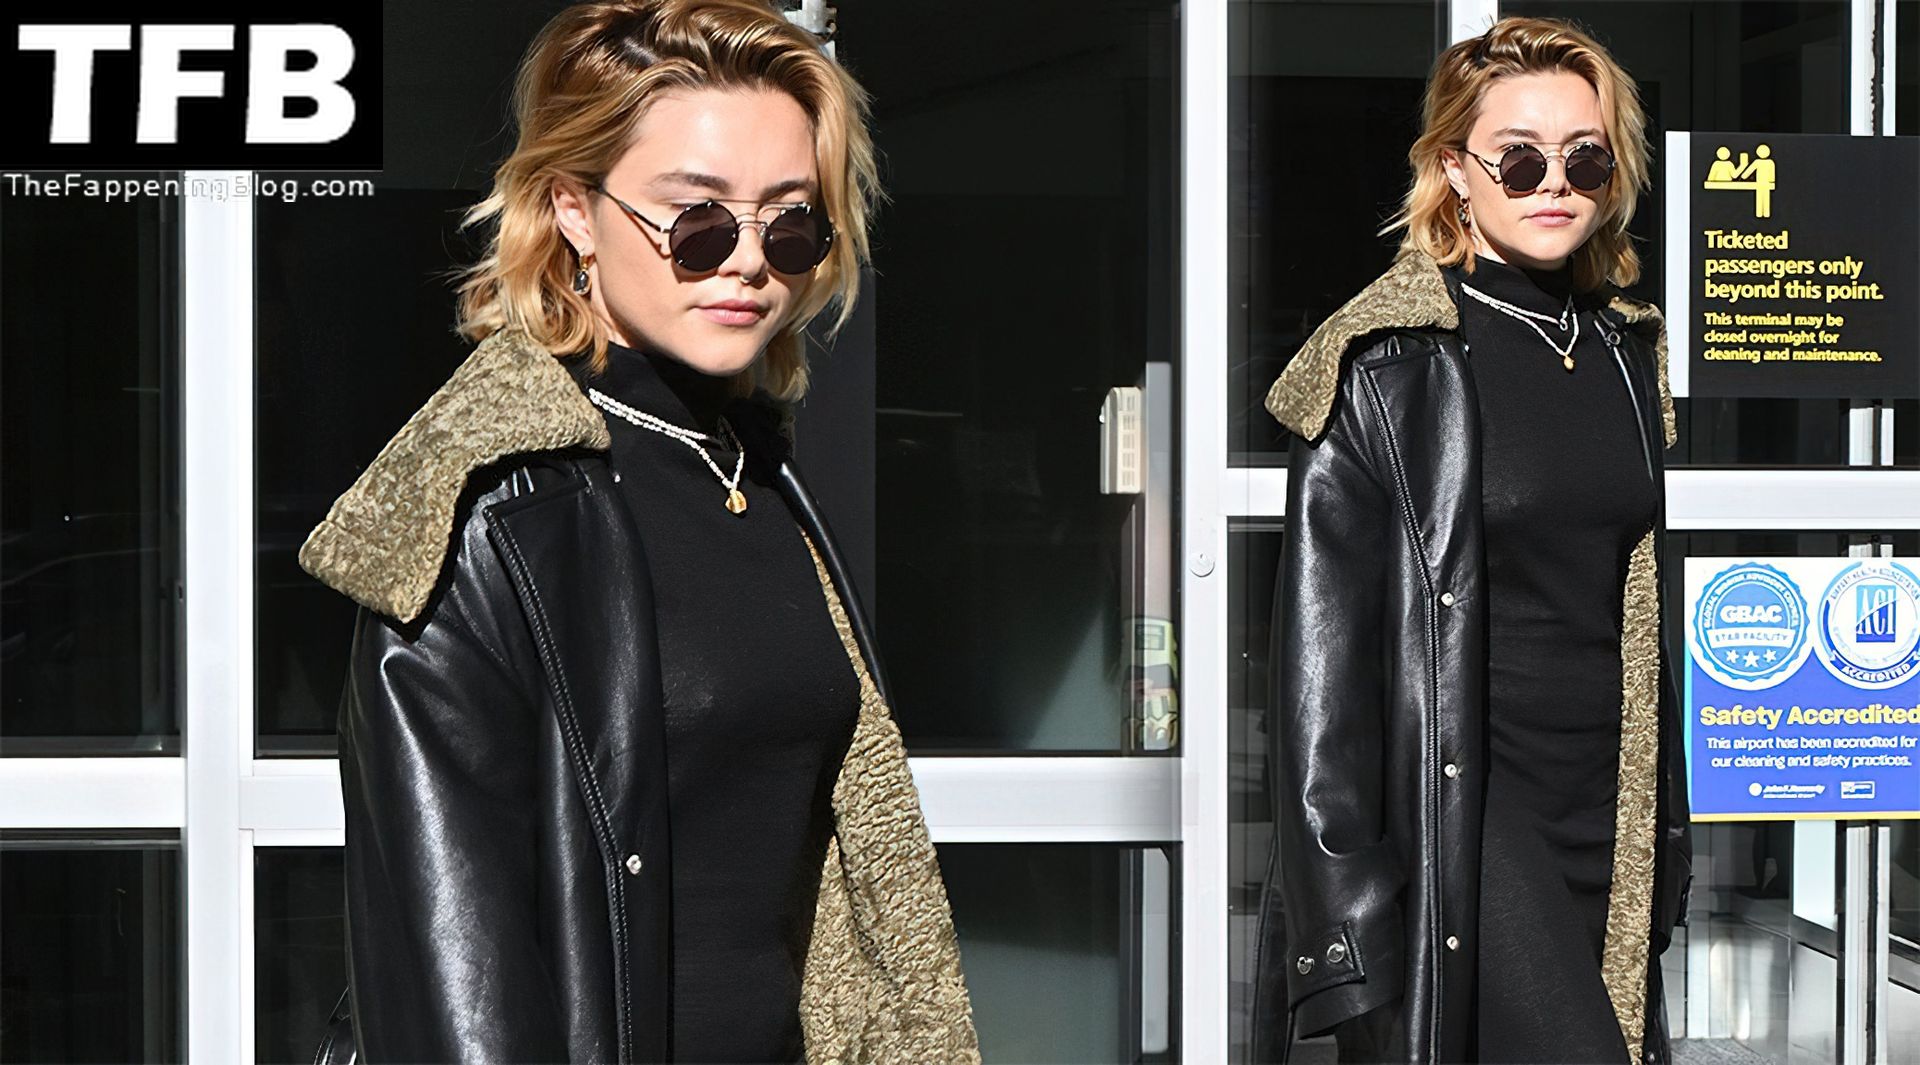 Florence Pough Braless Boobs and Nipples 1 thefappeningblog.com  - Florence Pugh Shows Off Her Pokies at JFK airport in NYC (31 Photos)